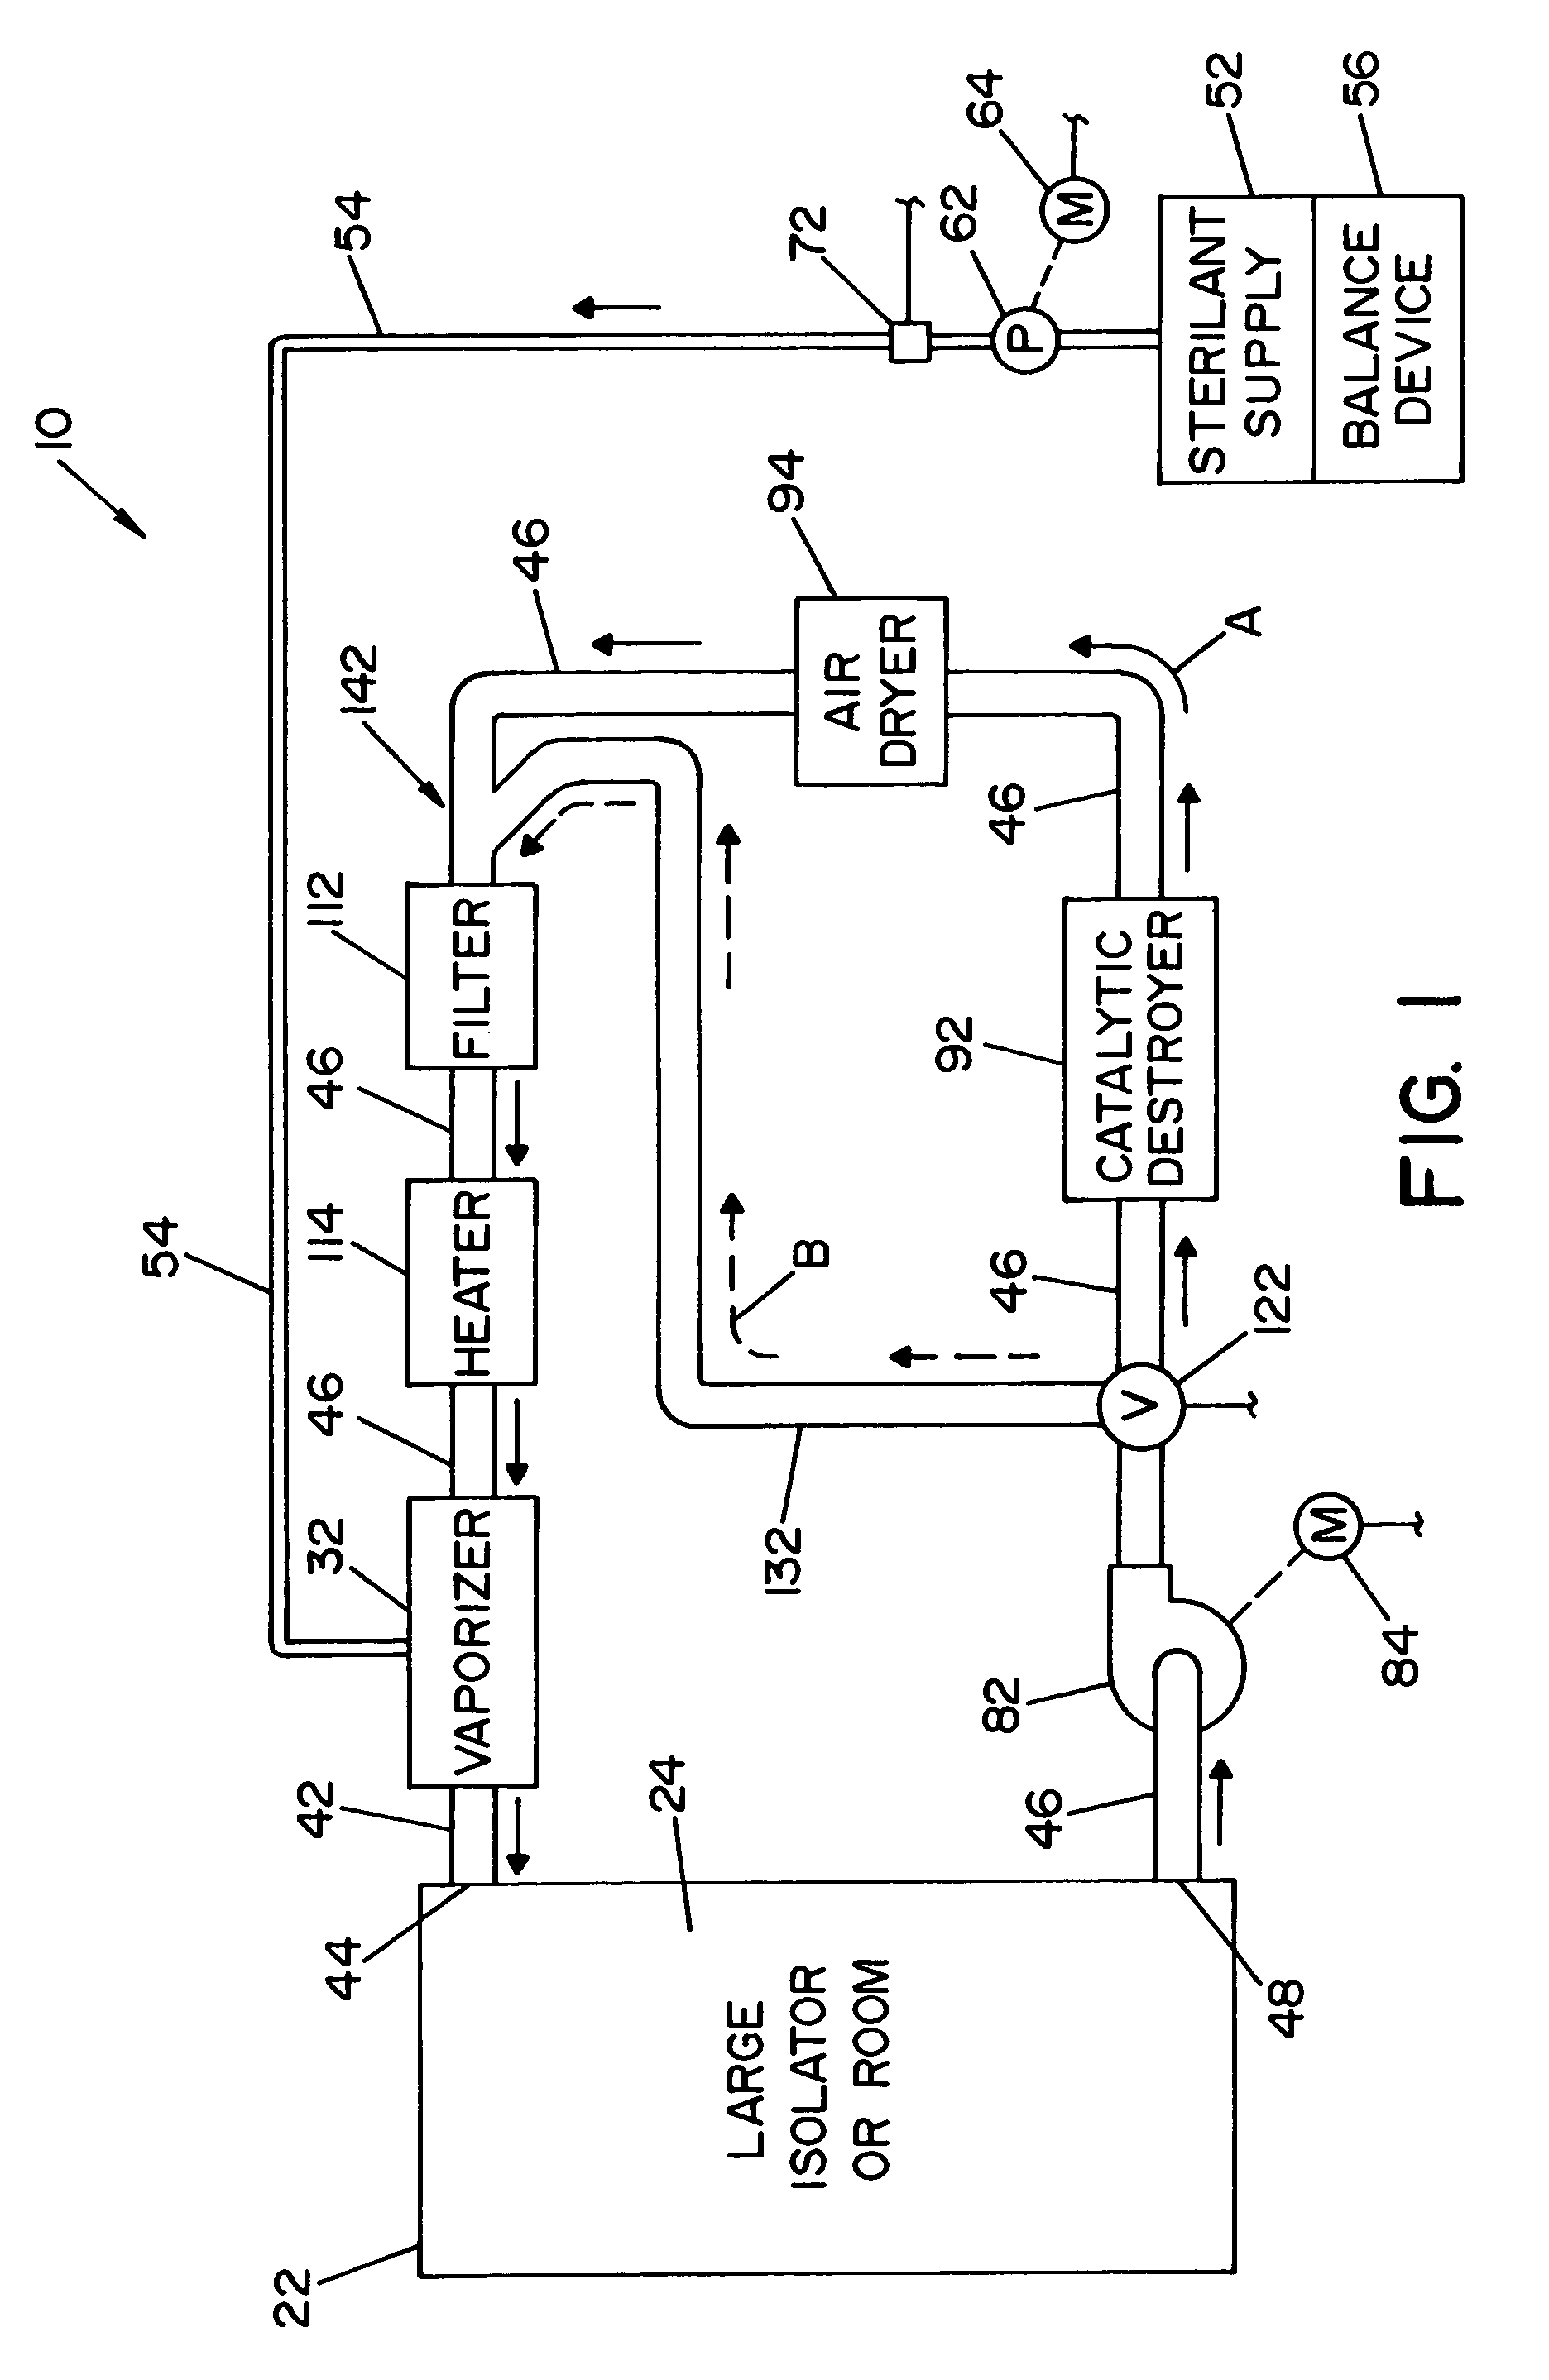 System and method for increasing concentration of sterilant in region